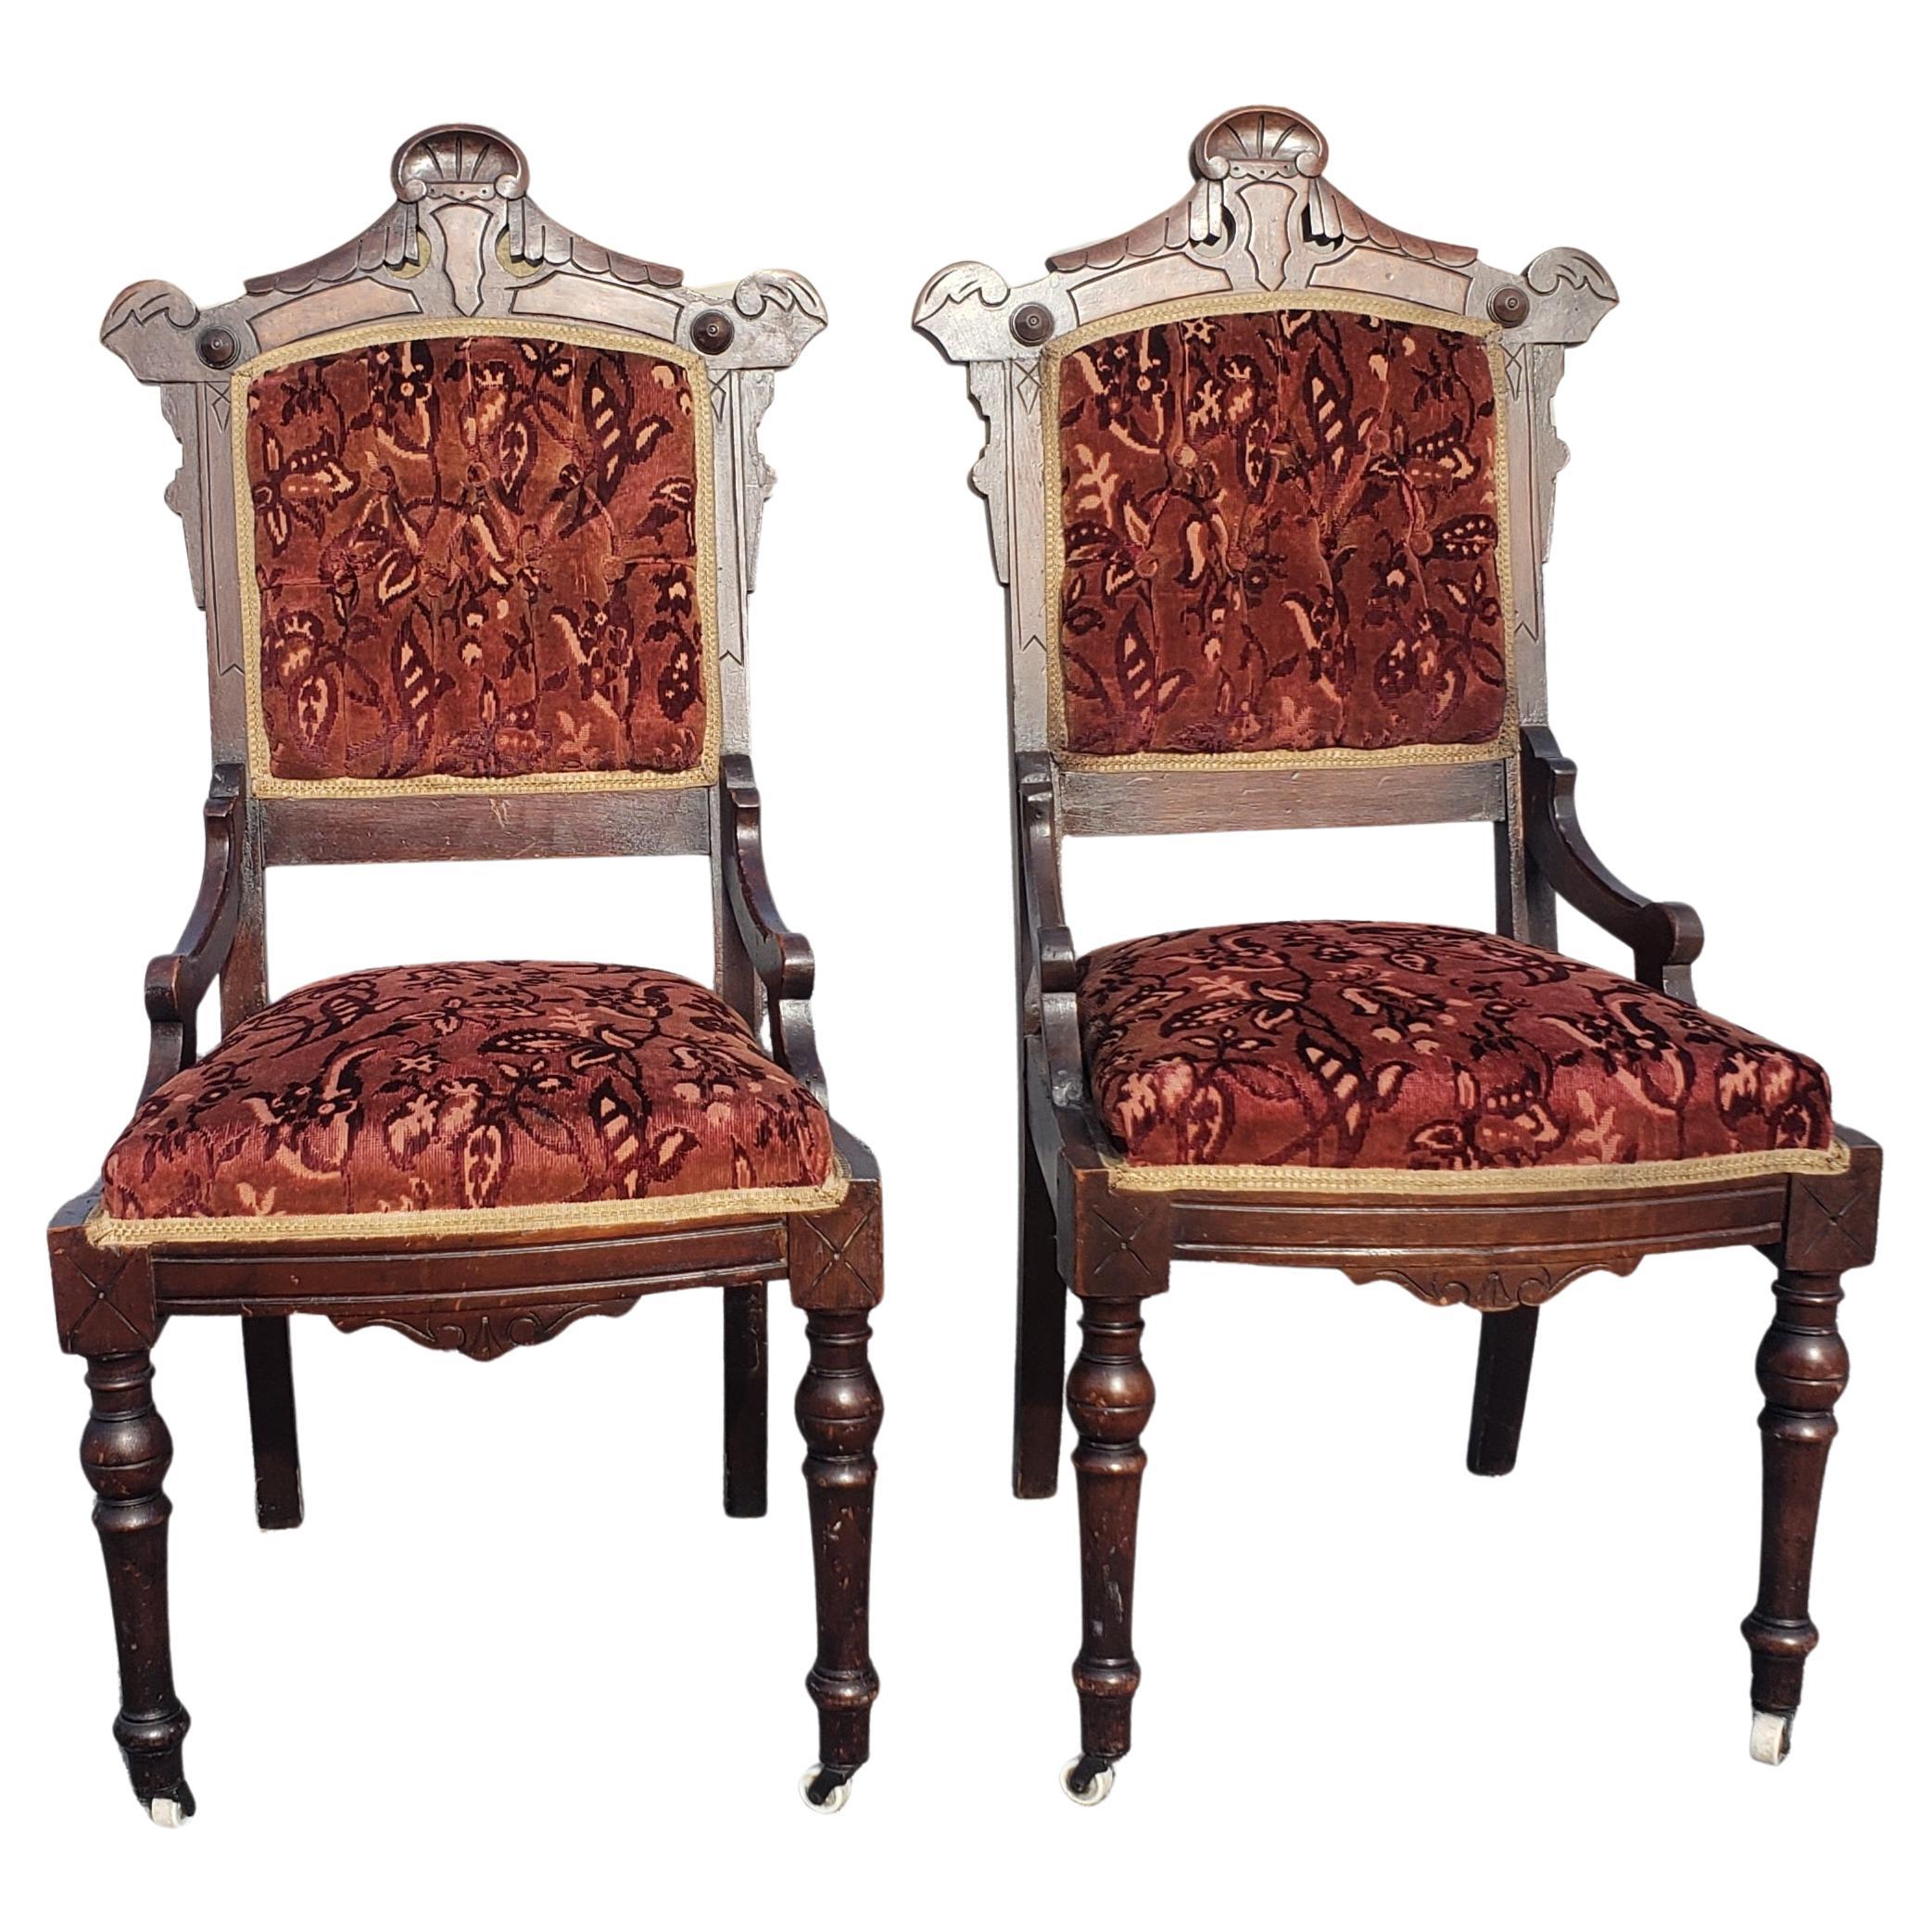 Pair of 1920s Philips & Philips Victorian Walnut and Velvet Upholstered Chairs